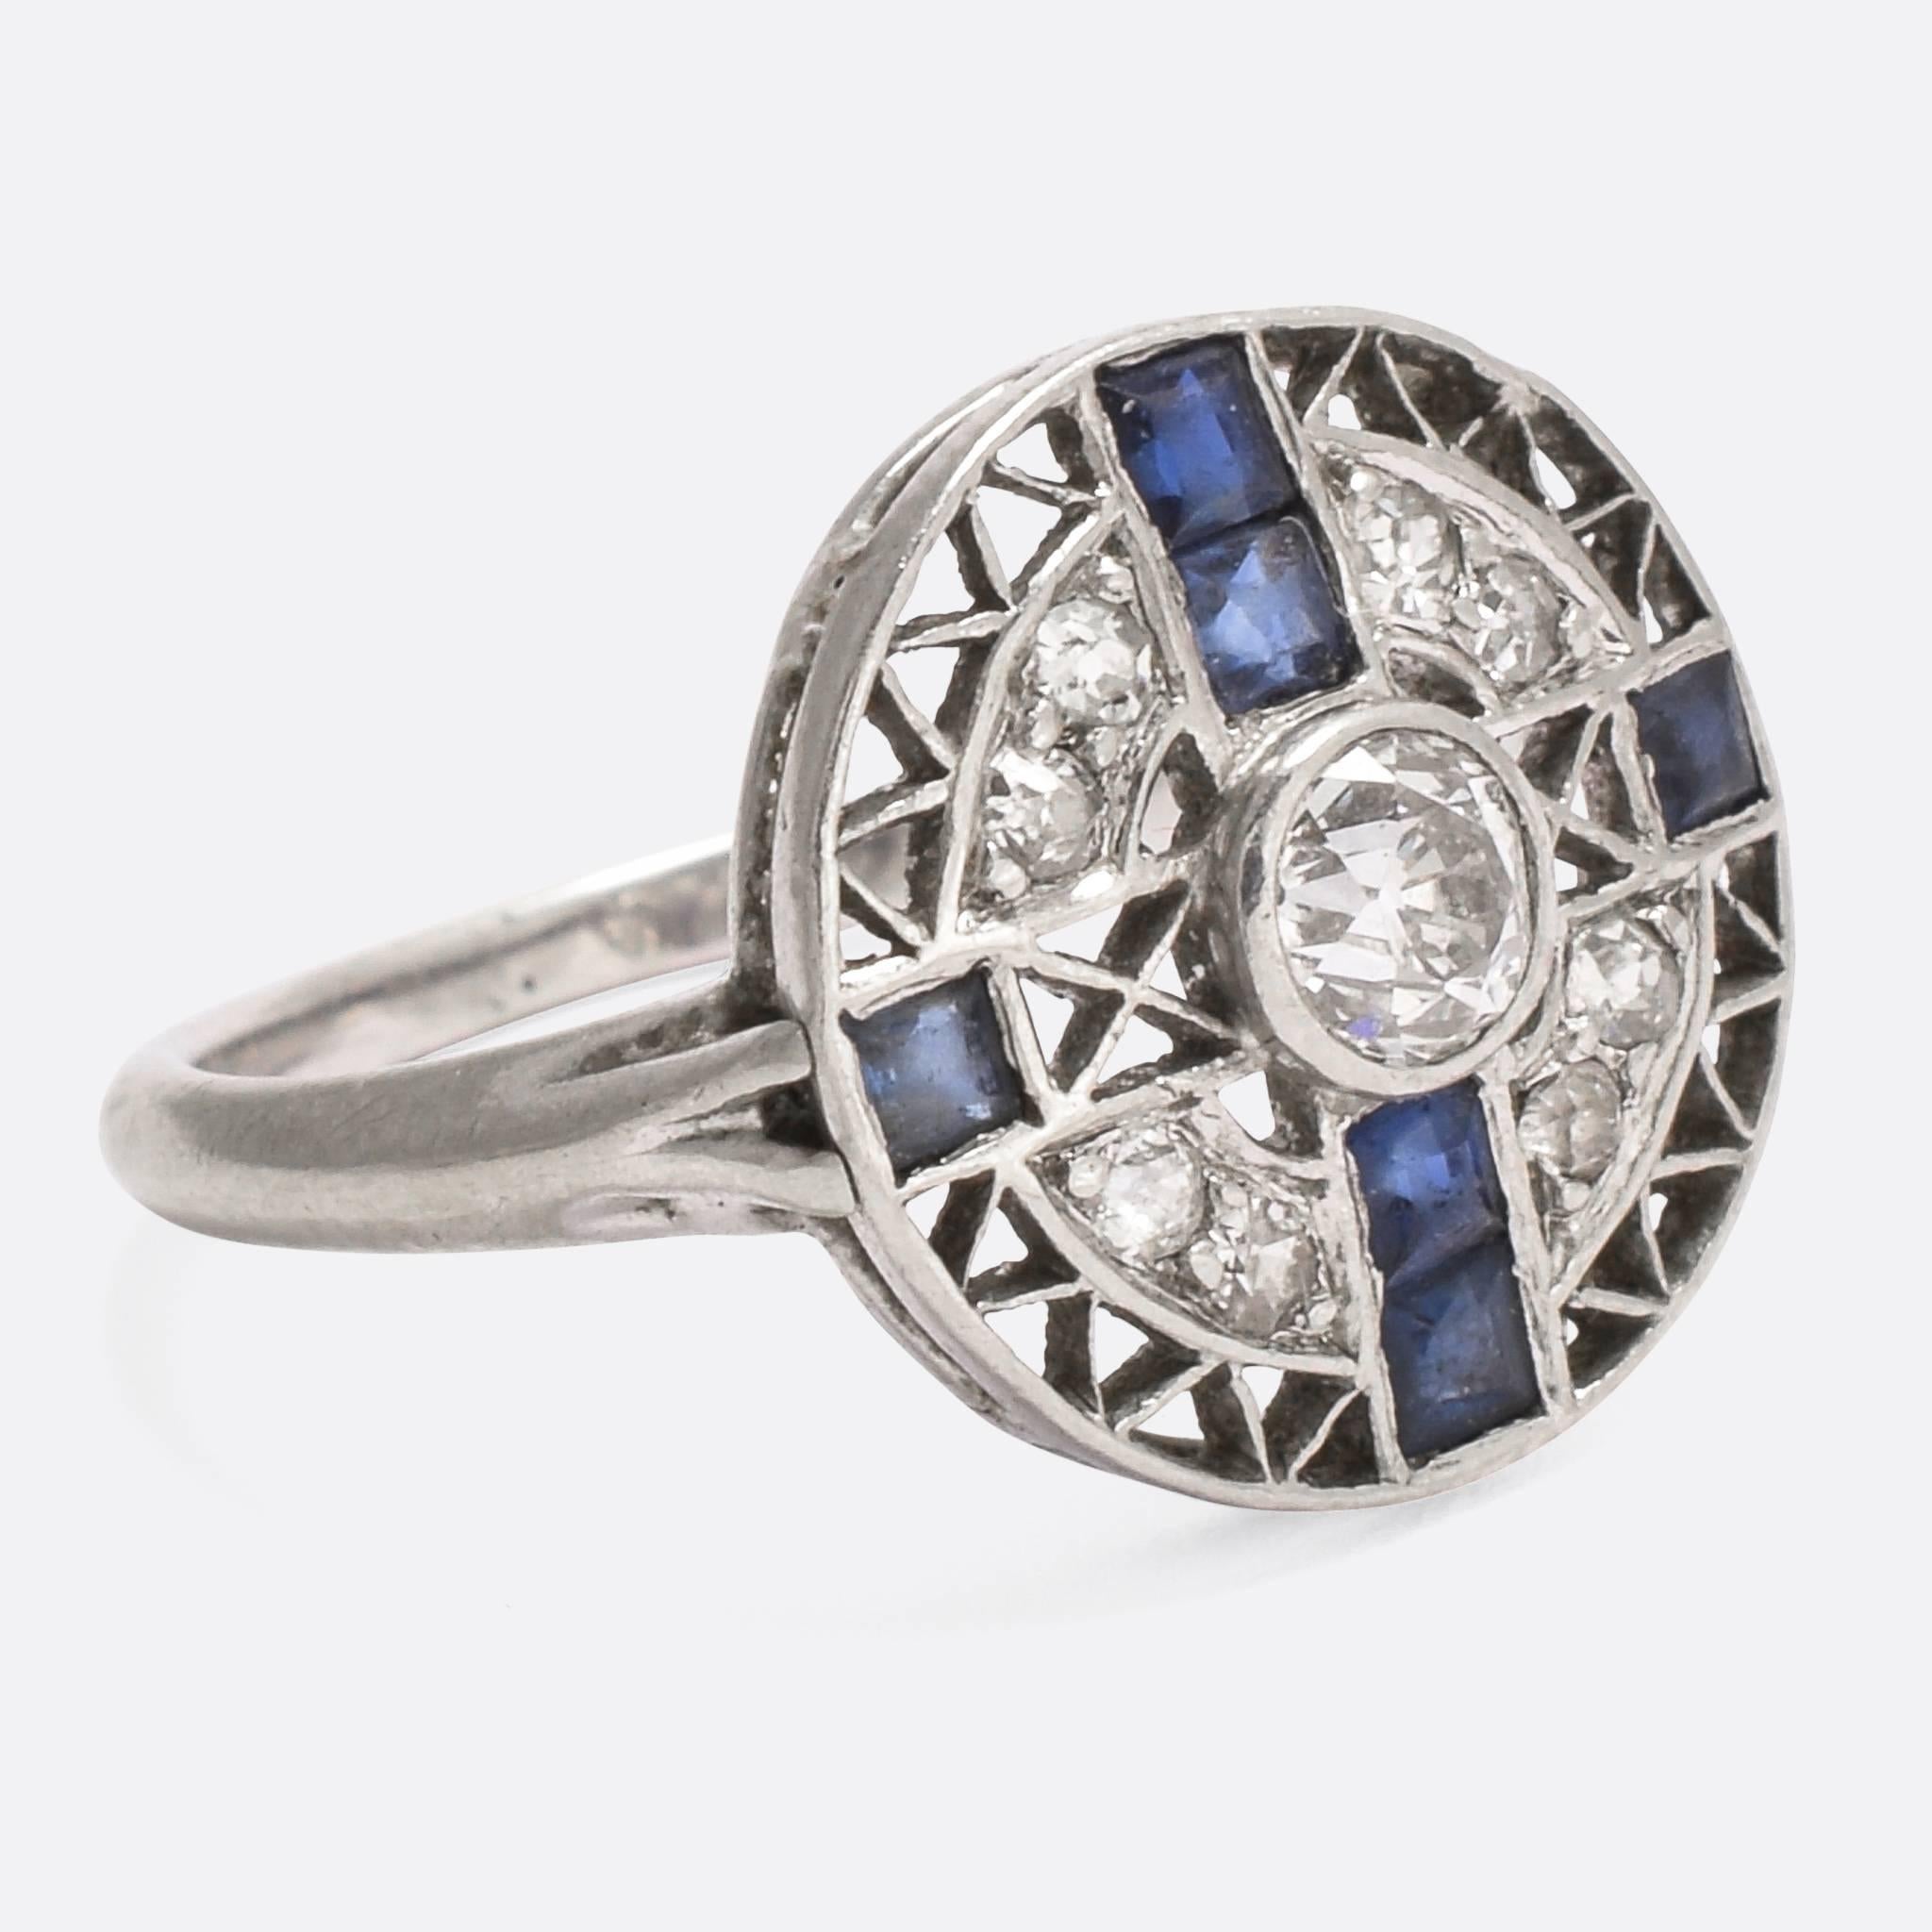 This superb Art Deco round cluster ring is set with six blue sapphires - in cross formation - and old cut diamonds. The head is intricately openworked, with triangular cut-out sections and crosses - all surrounding a central .20ct old European cut